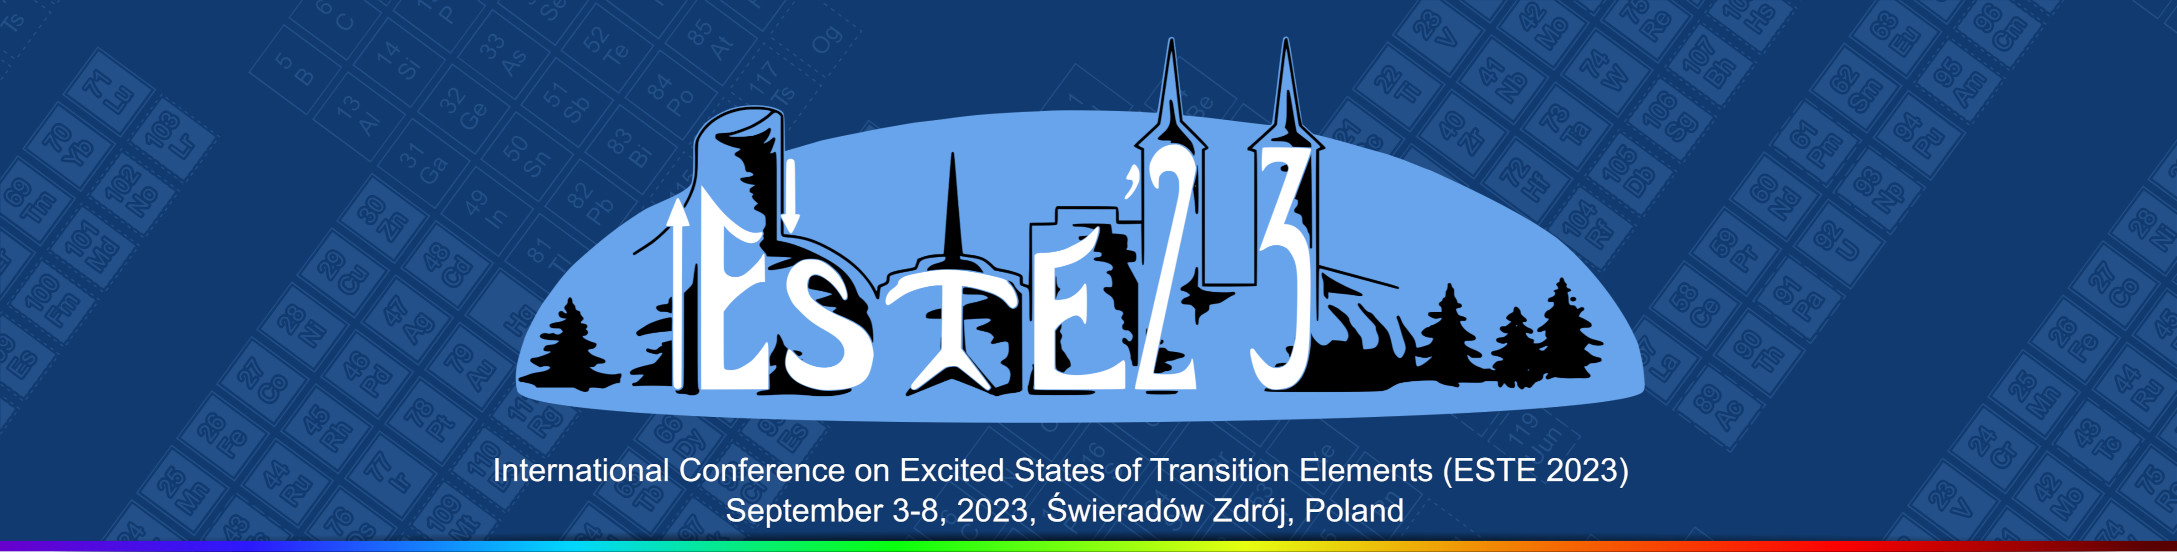 ESTE 2023 - Excited States of Transitions Elements